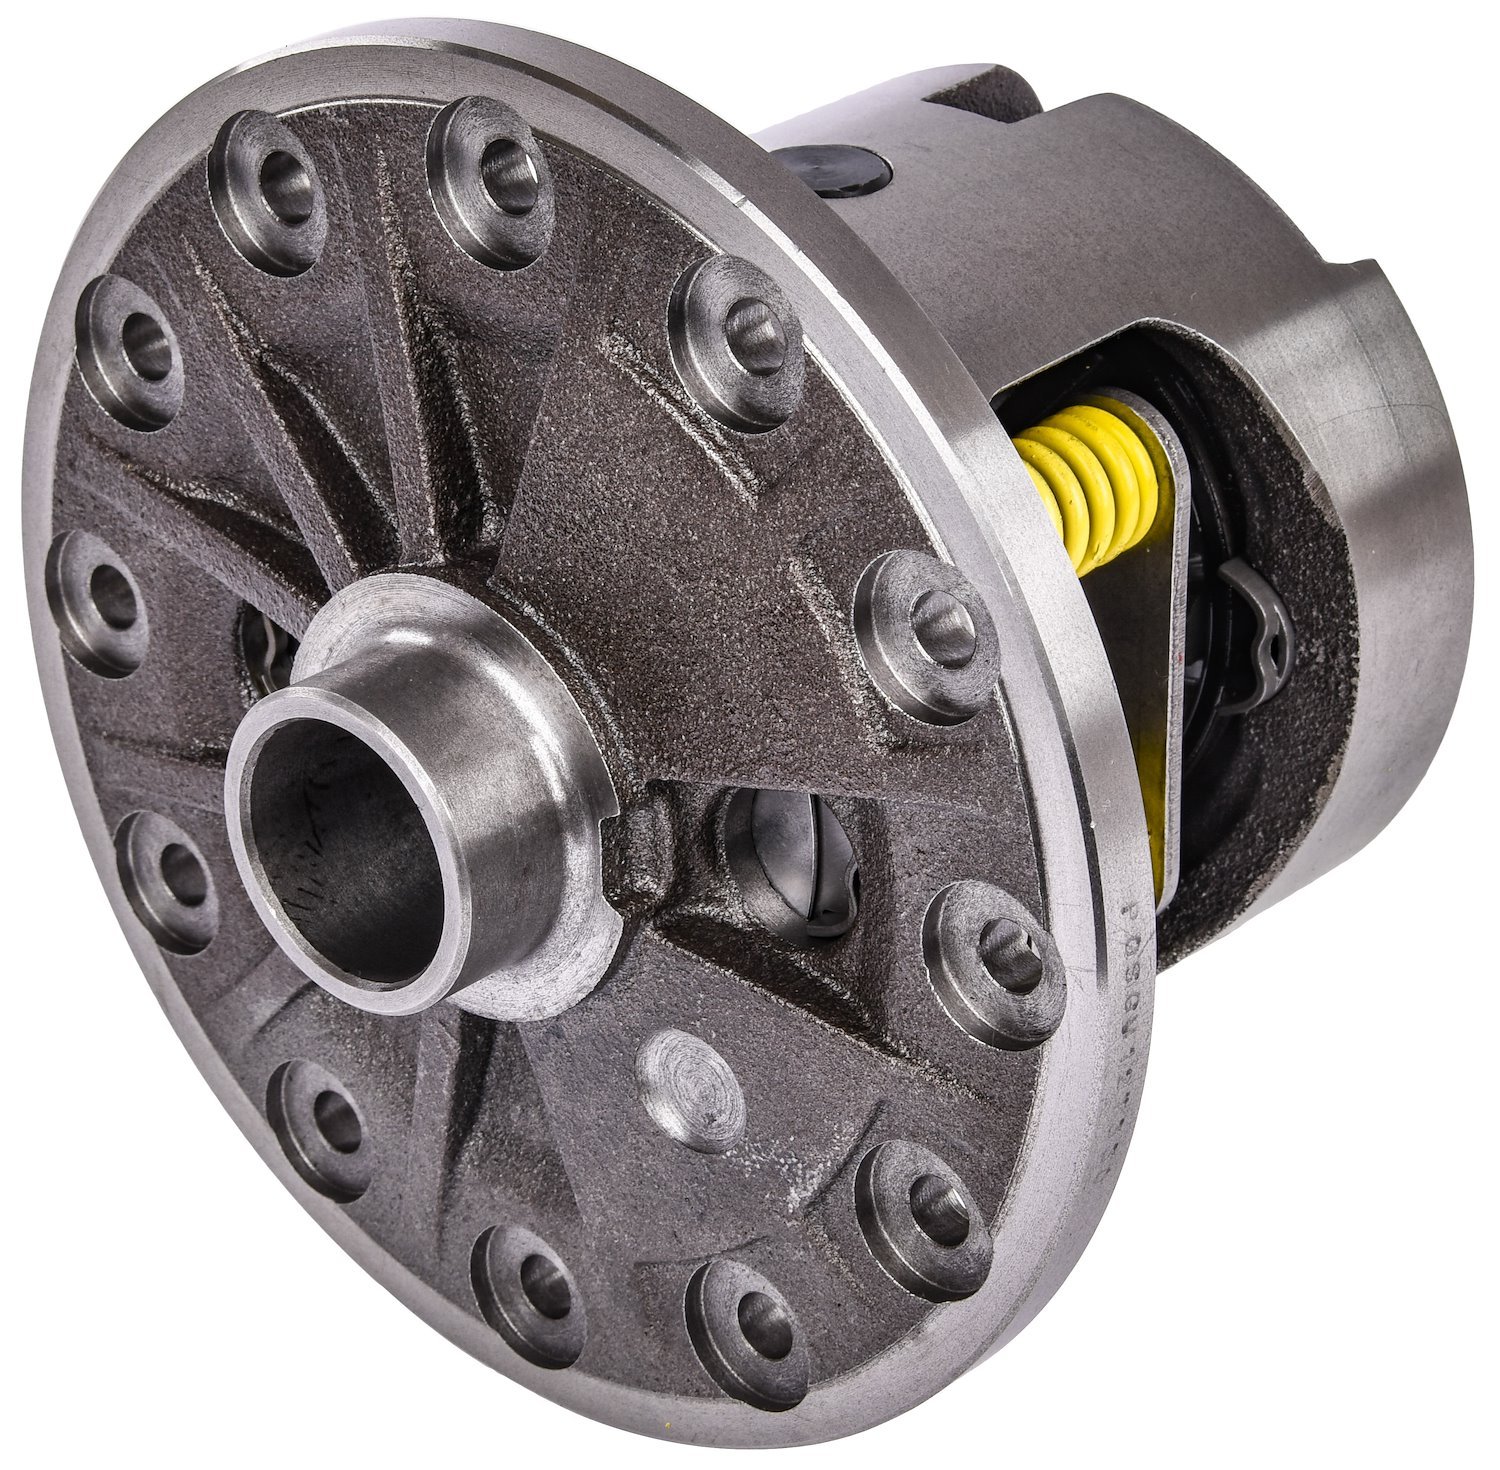 Posi Traction Differential for GM Truck 12-Bolt 8.875 in. Rear, 30-Spline [2.76-3.42 Ratio]